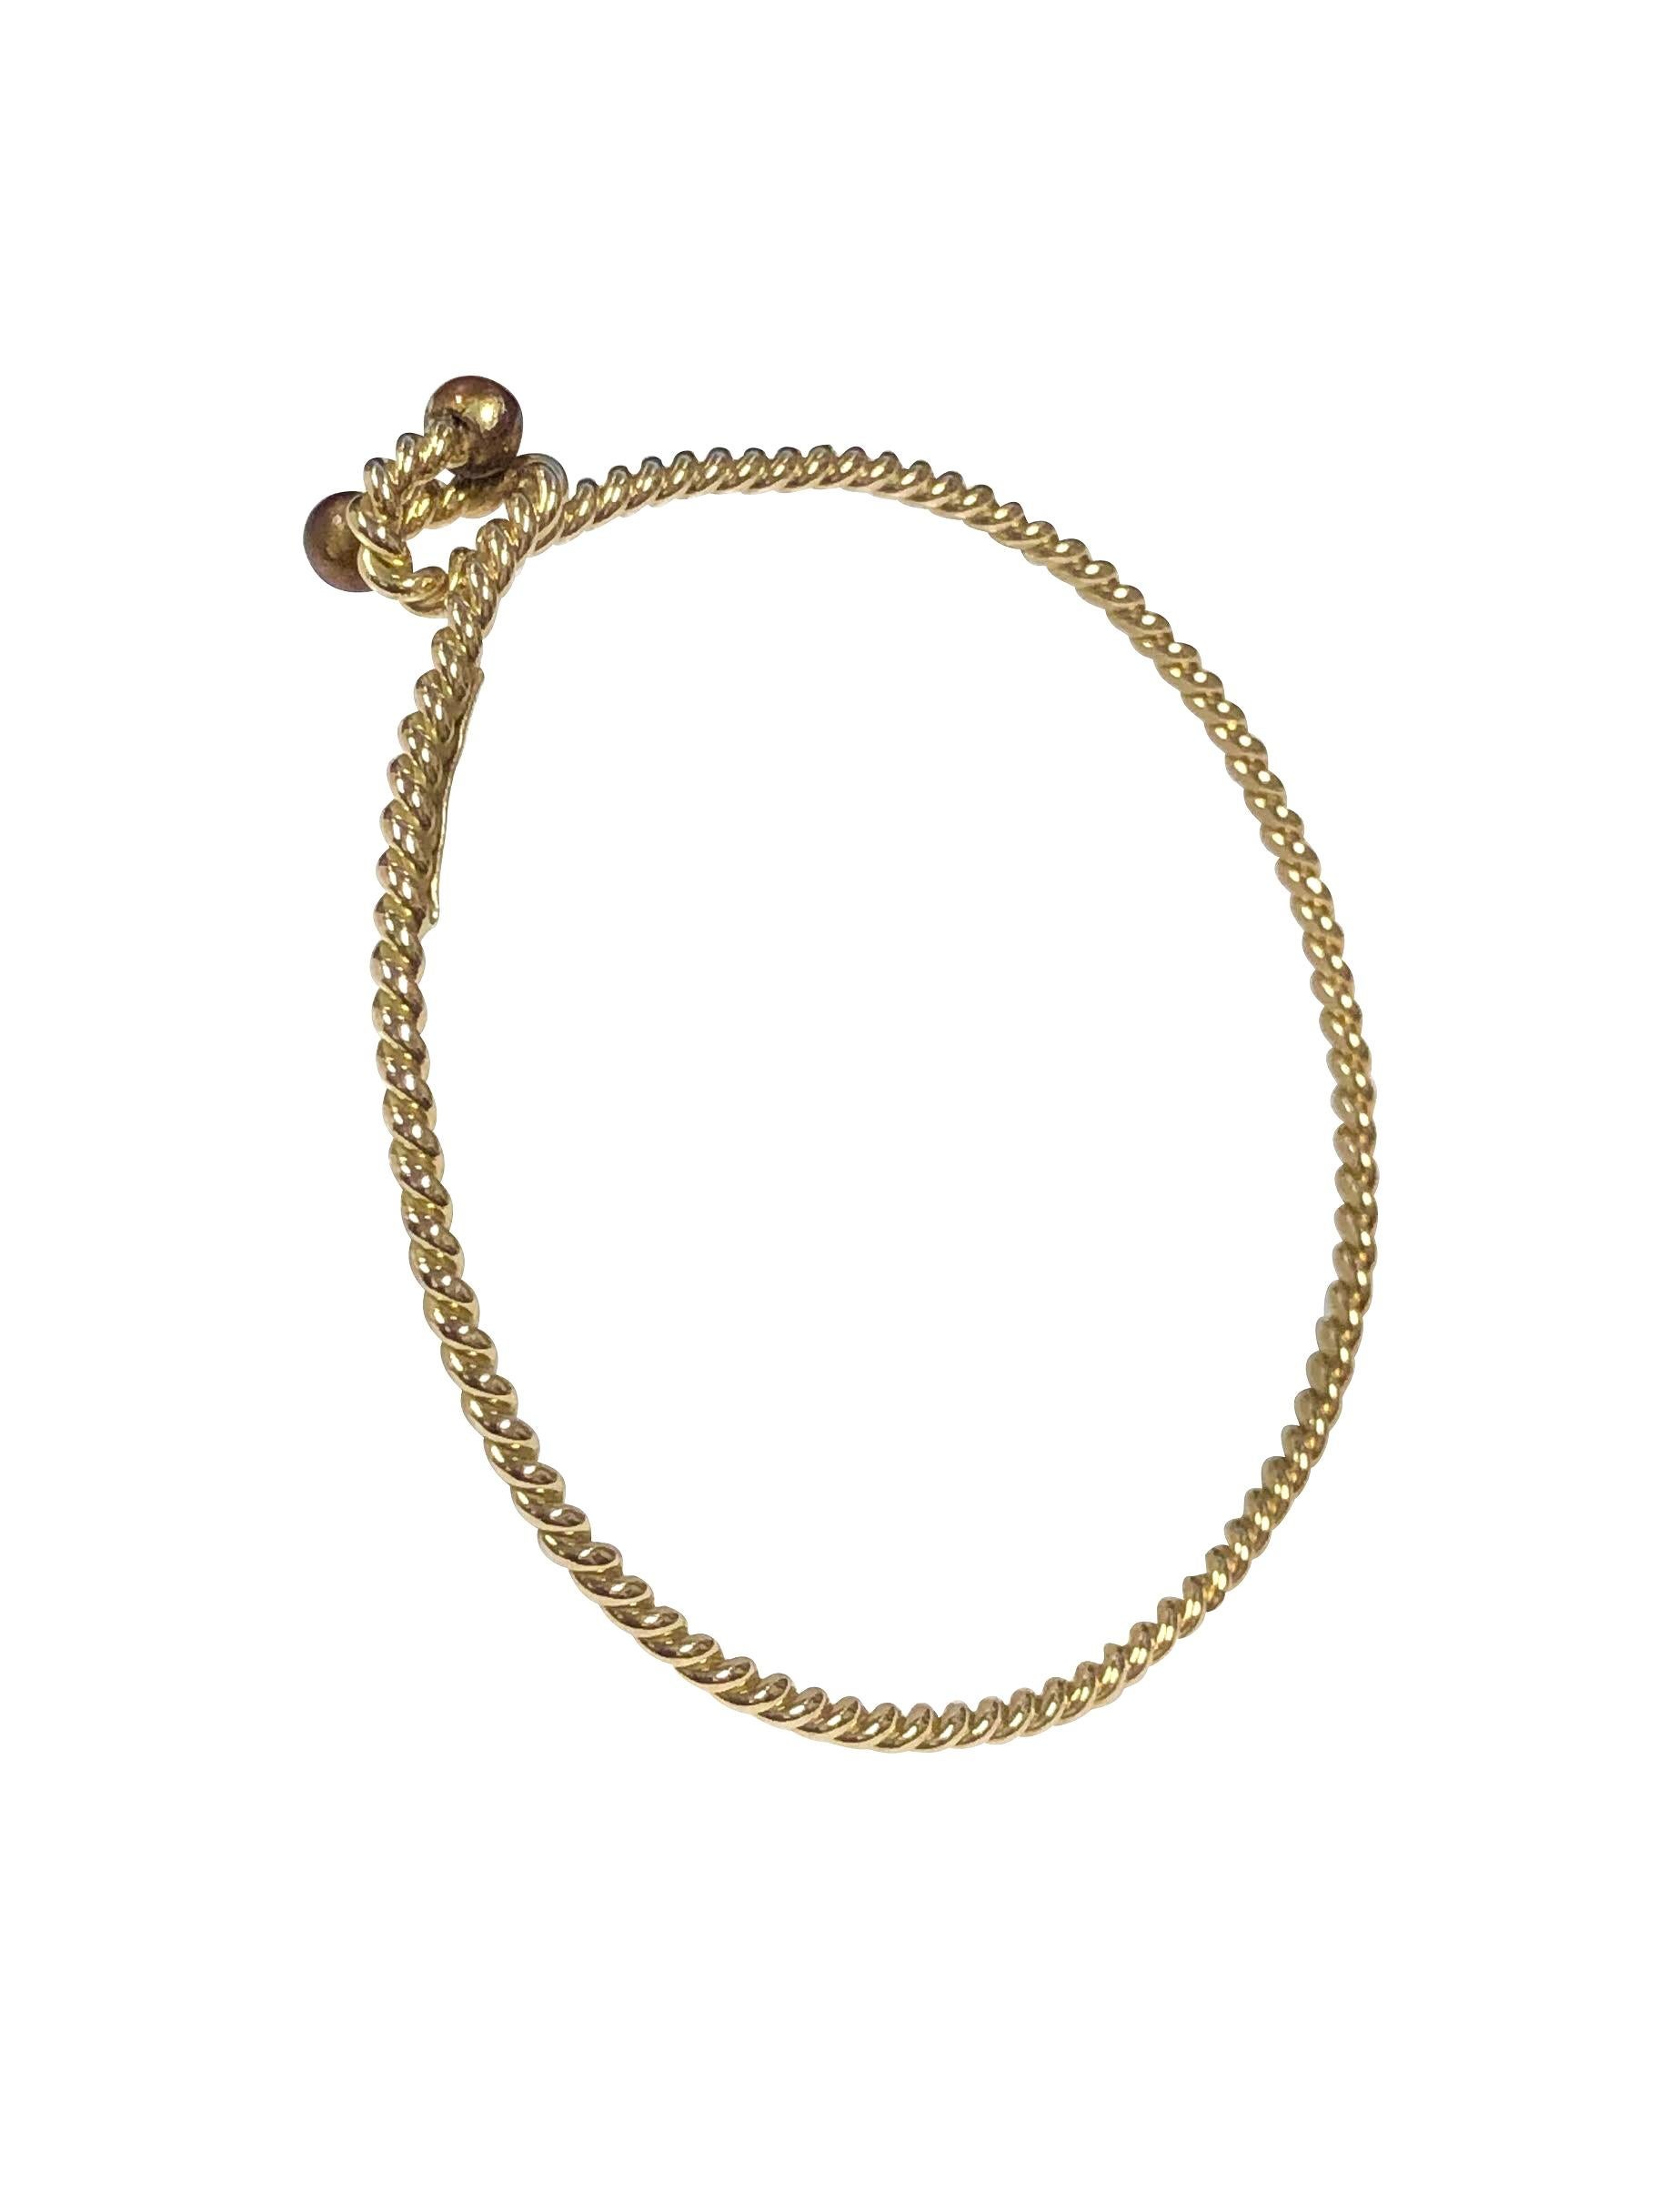 Circa 1970s Gucci 18K yellow Gold Bracelet in a Nautical Twisted Rope Design, 2 M.M. thick with an inside wrist measurement of 7 1/2 inches.